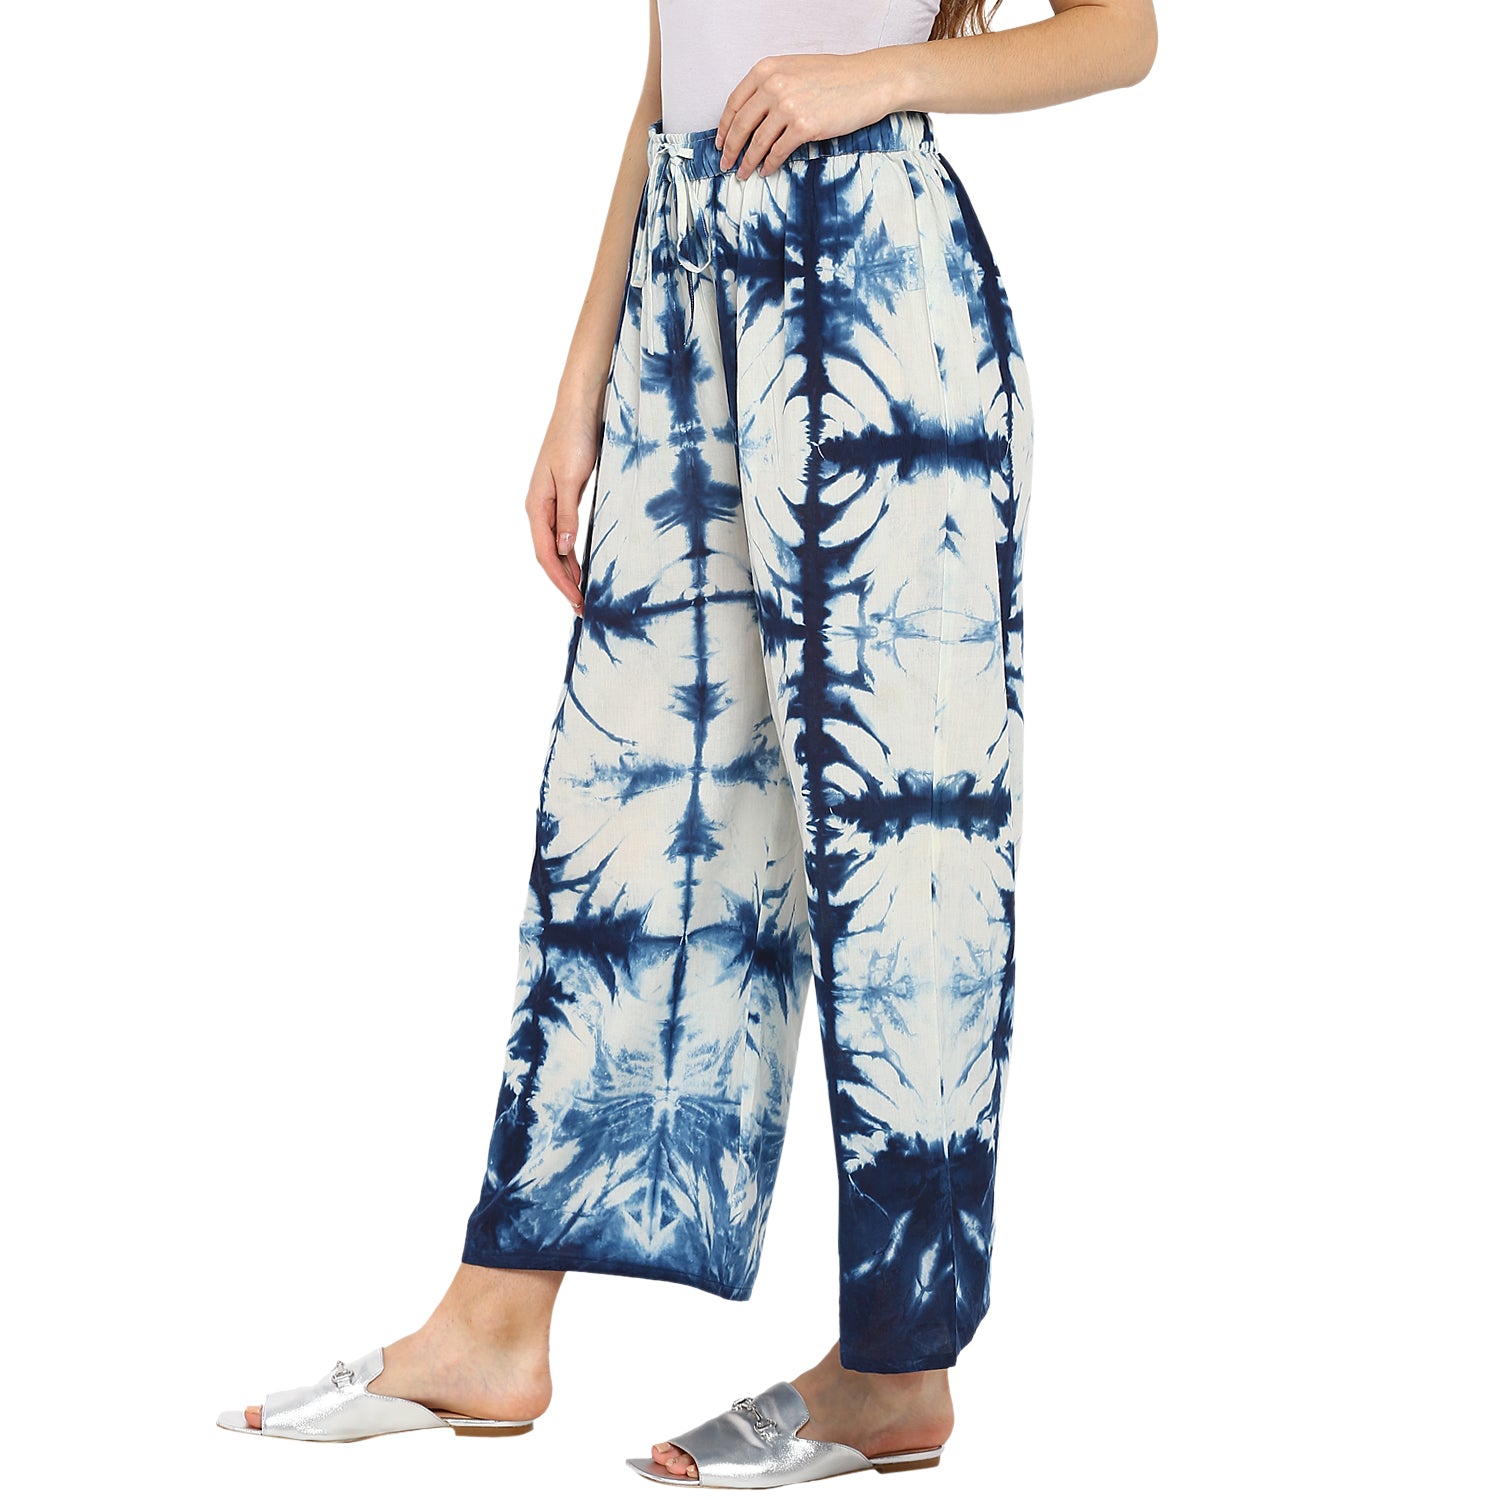 Freesize Palazzos for women Online